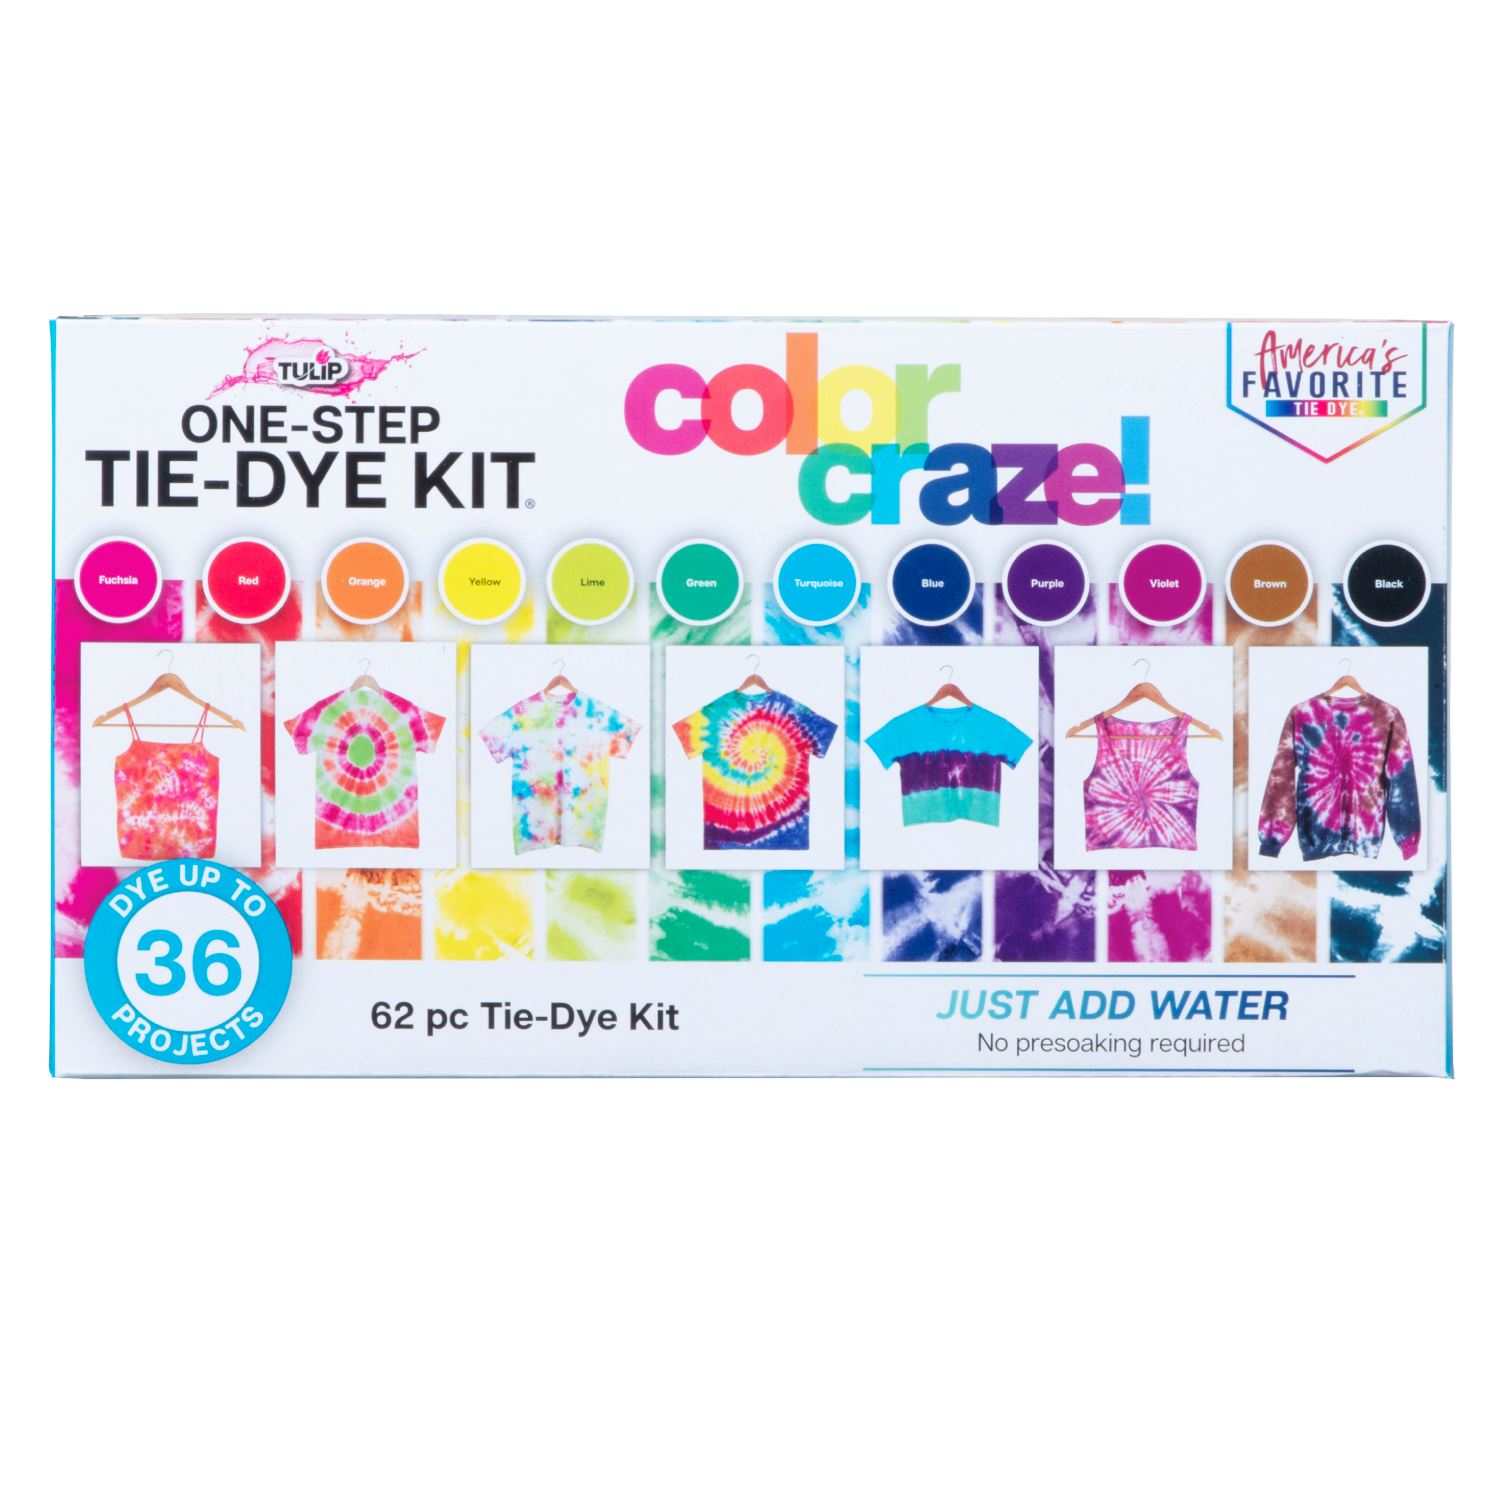 Tulip 5 Color One-Step Tie-Dye Kit Rainbow, Bright Colors in 8 fl